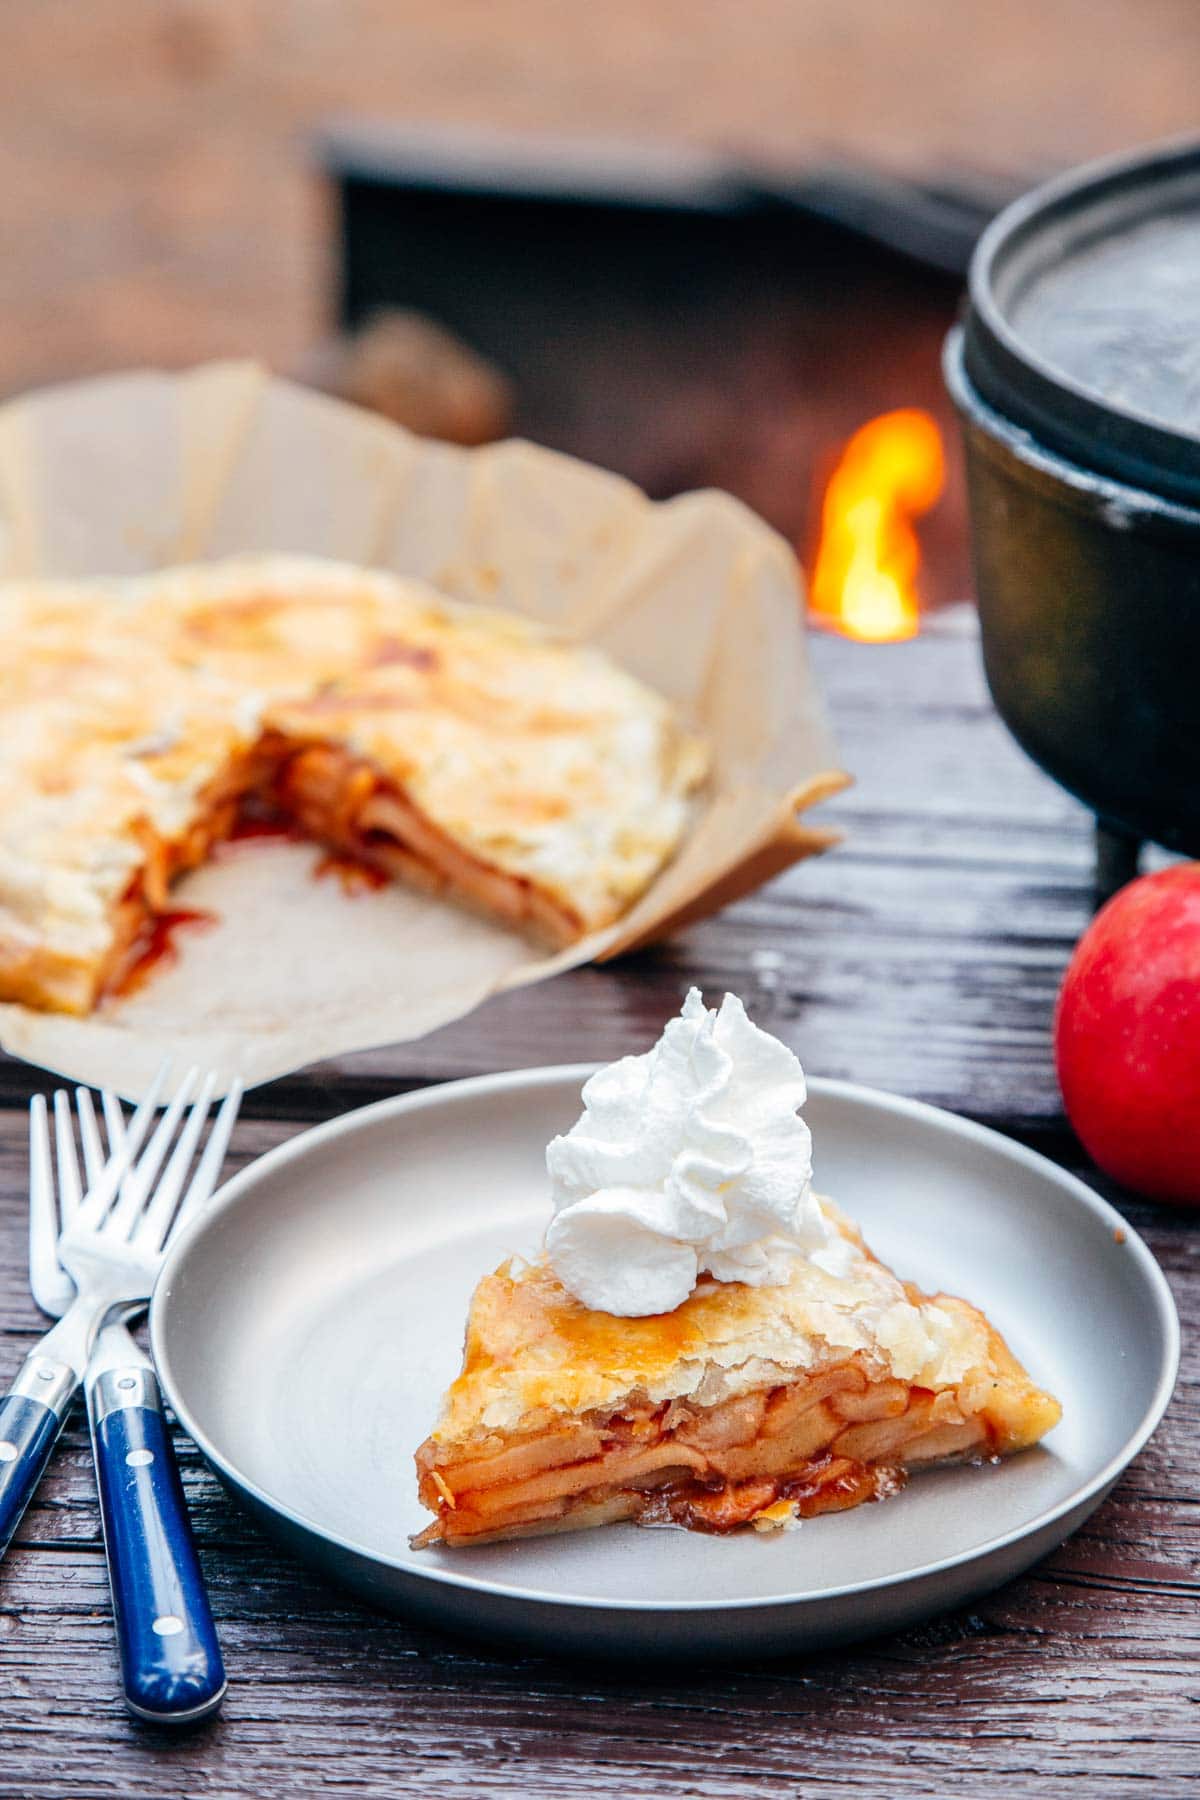 Slice of apple pie on a plate with a Dutch oven and campfire in the background